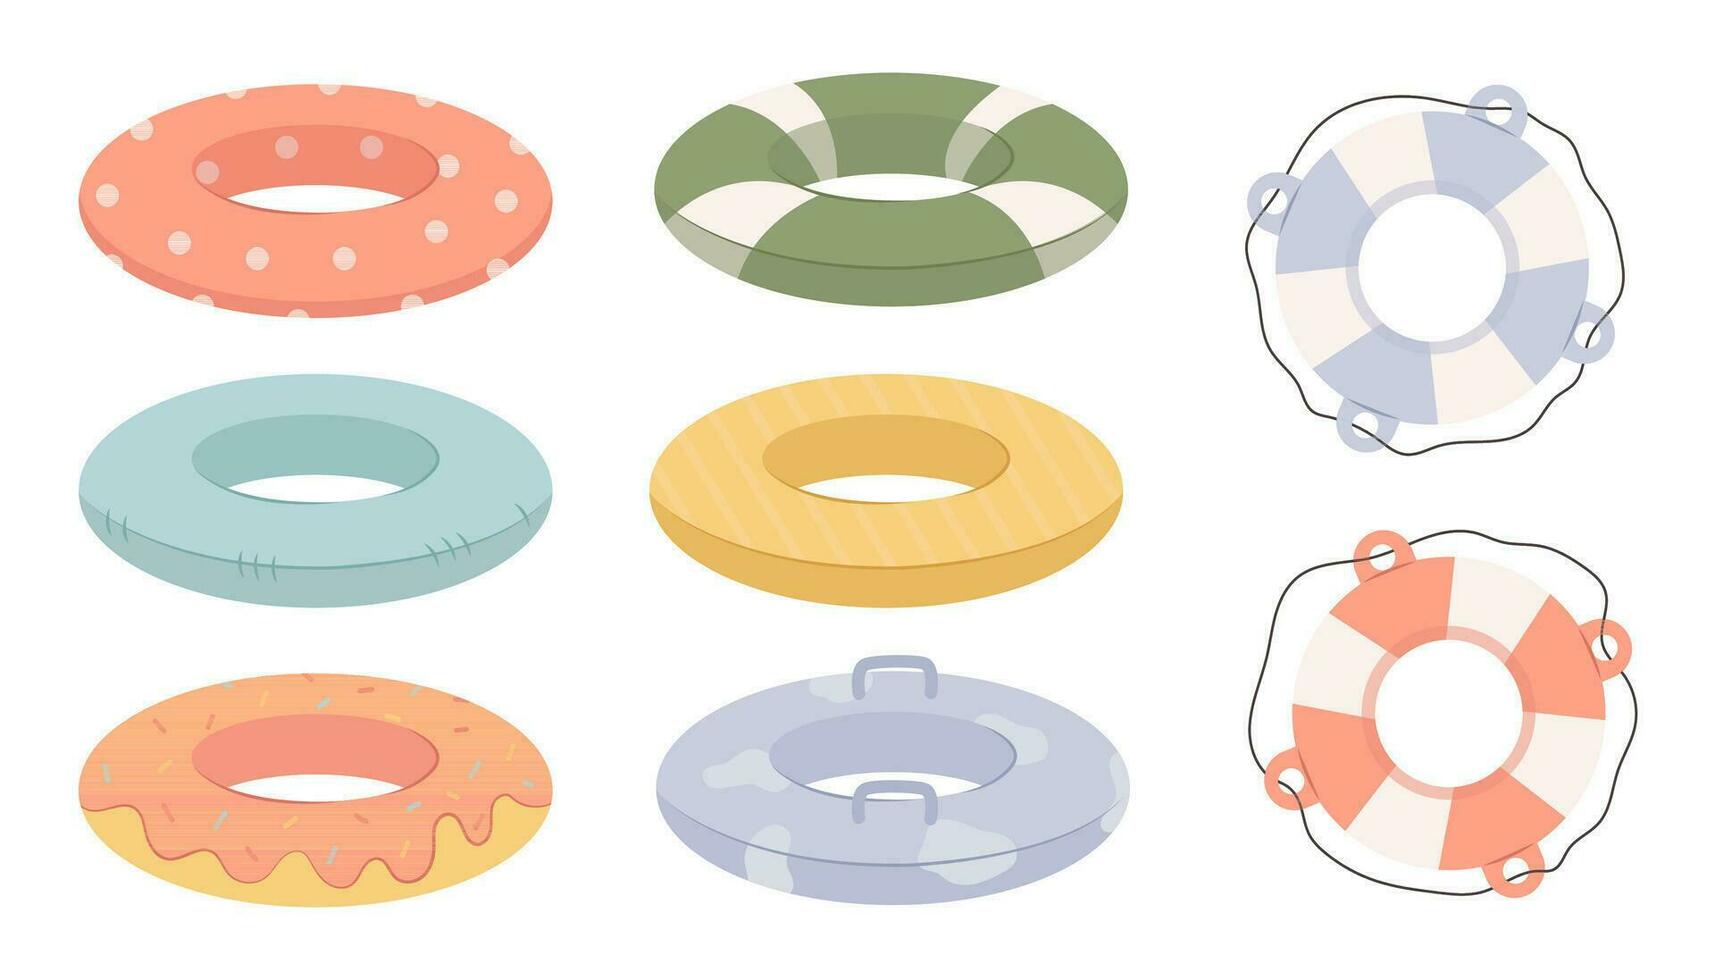 Summer pool rubber ring set. Set of swim rings on white background. Inflatable rubber toy for water and beach. Colorful lifebuoy for swimming in various prints. Vector stock illustration.